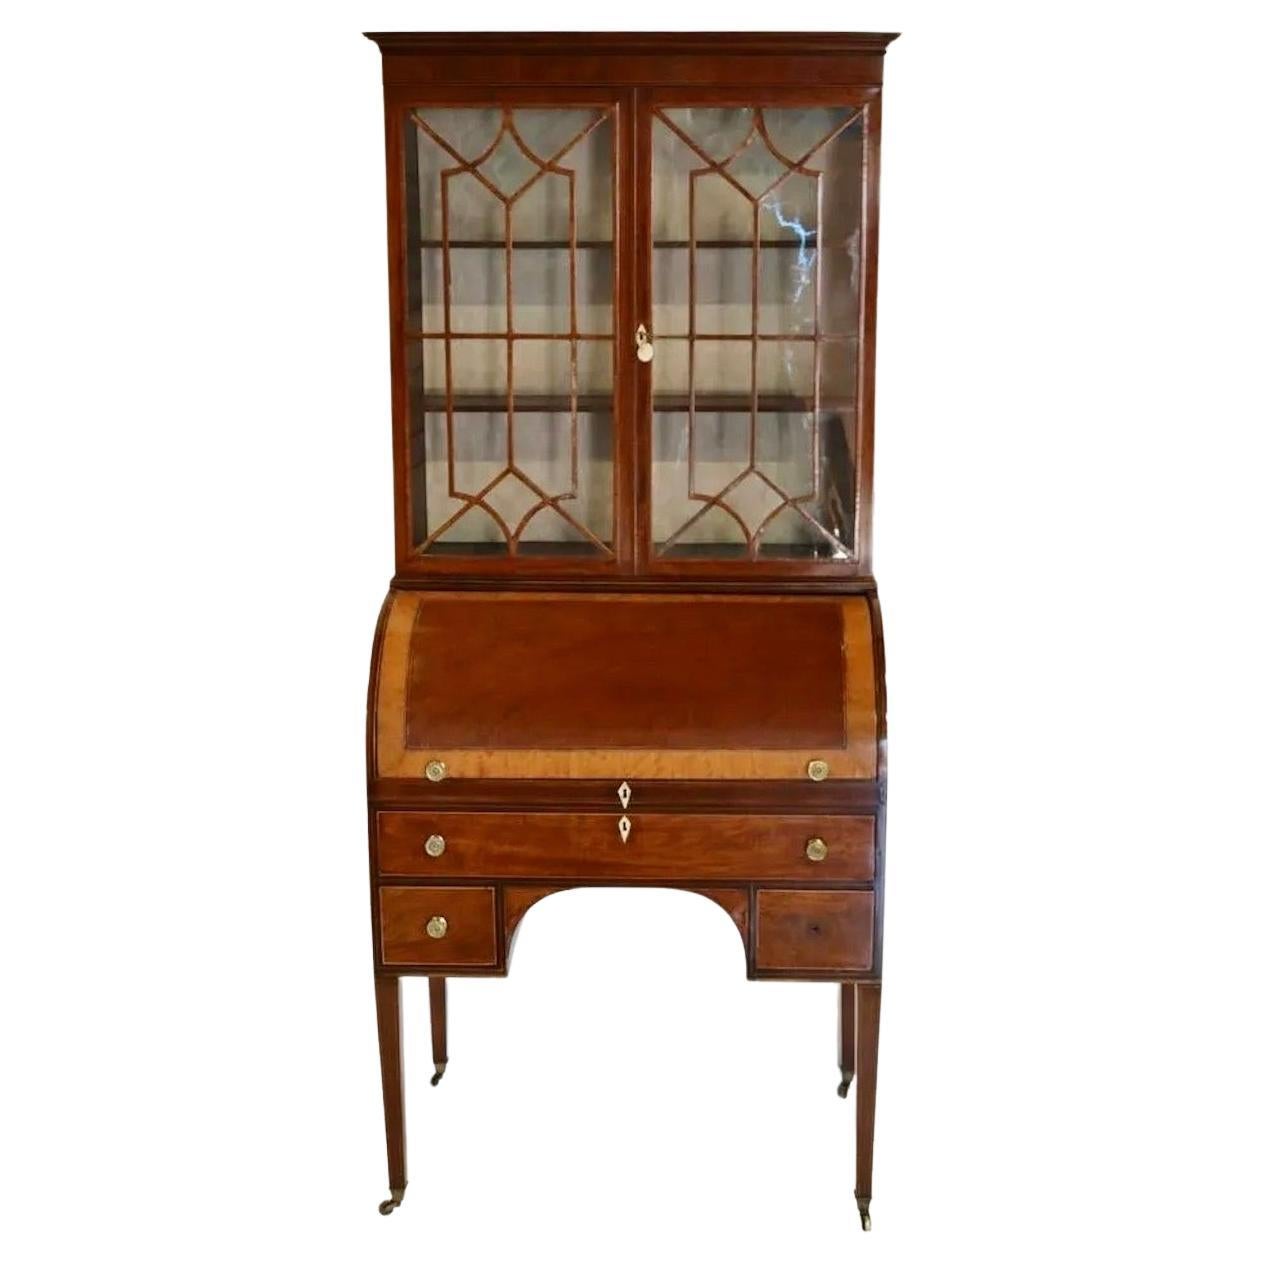 Period Mahogany George III Hepplewhite Cylinder Top Secretary Bookcase.  Tapered Legs.  Maple inlaid top.  Interior reveal leather writing surface and pigeon hole compartments.  Beautiful execution and wonderful size